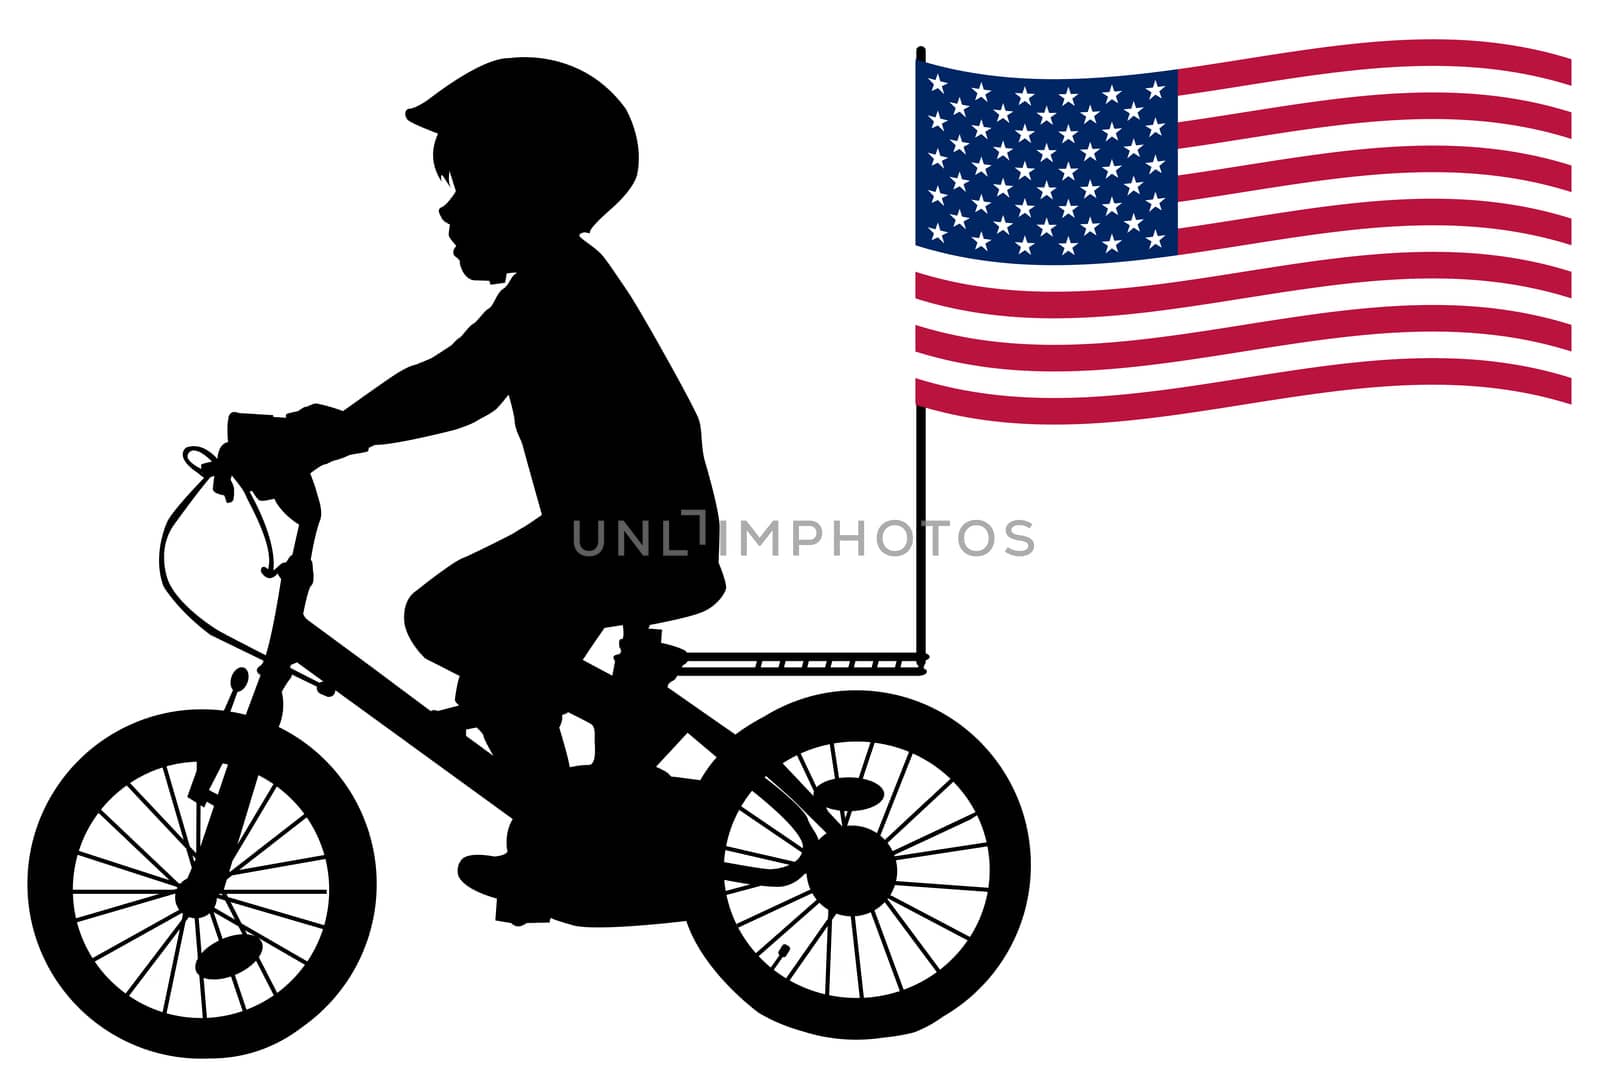 A kid silhouette rides a bicycle with USA flag